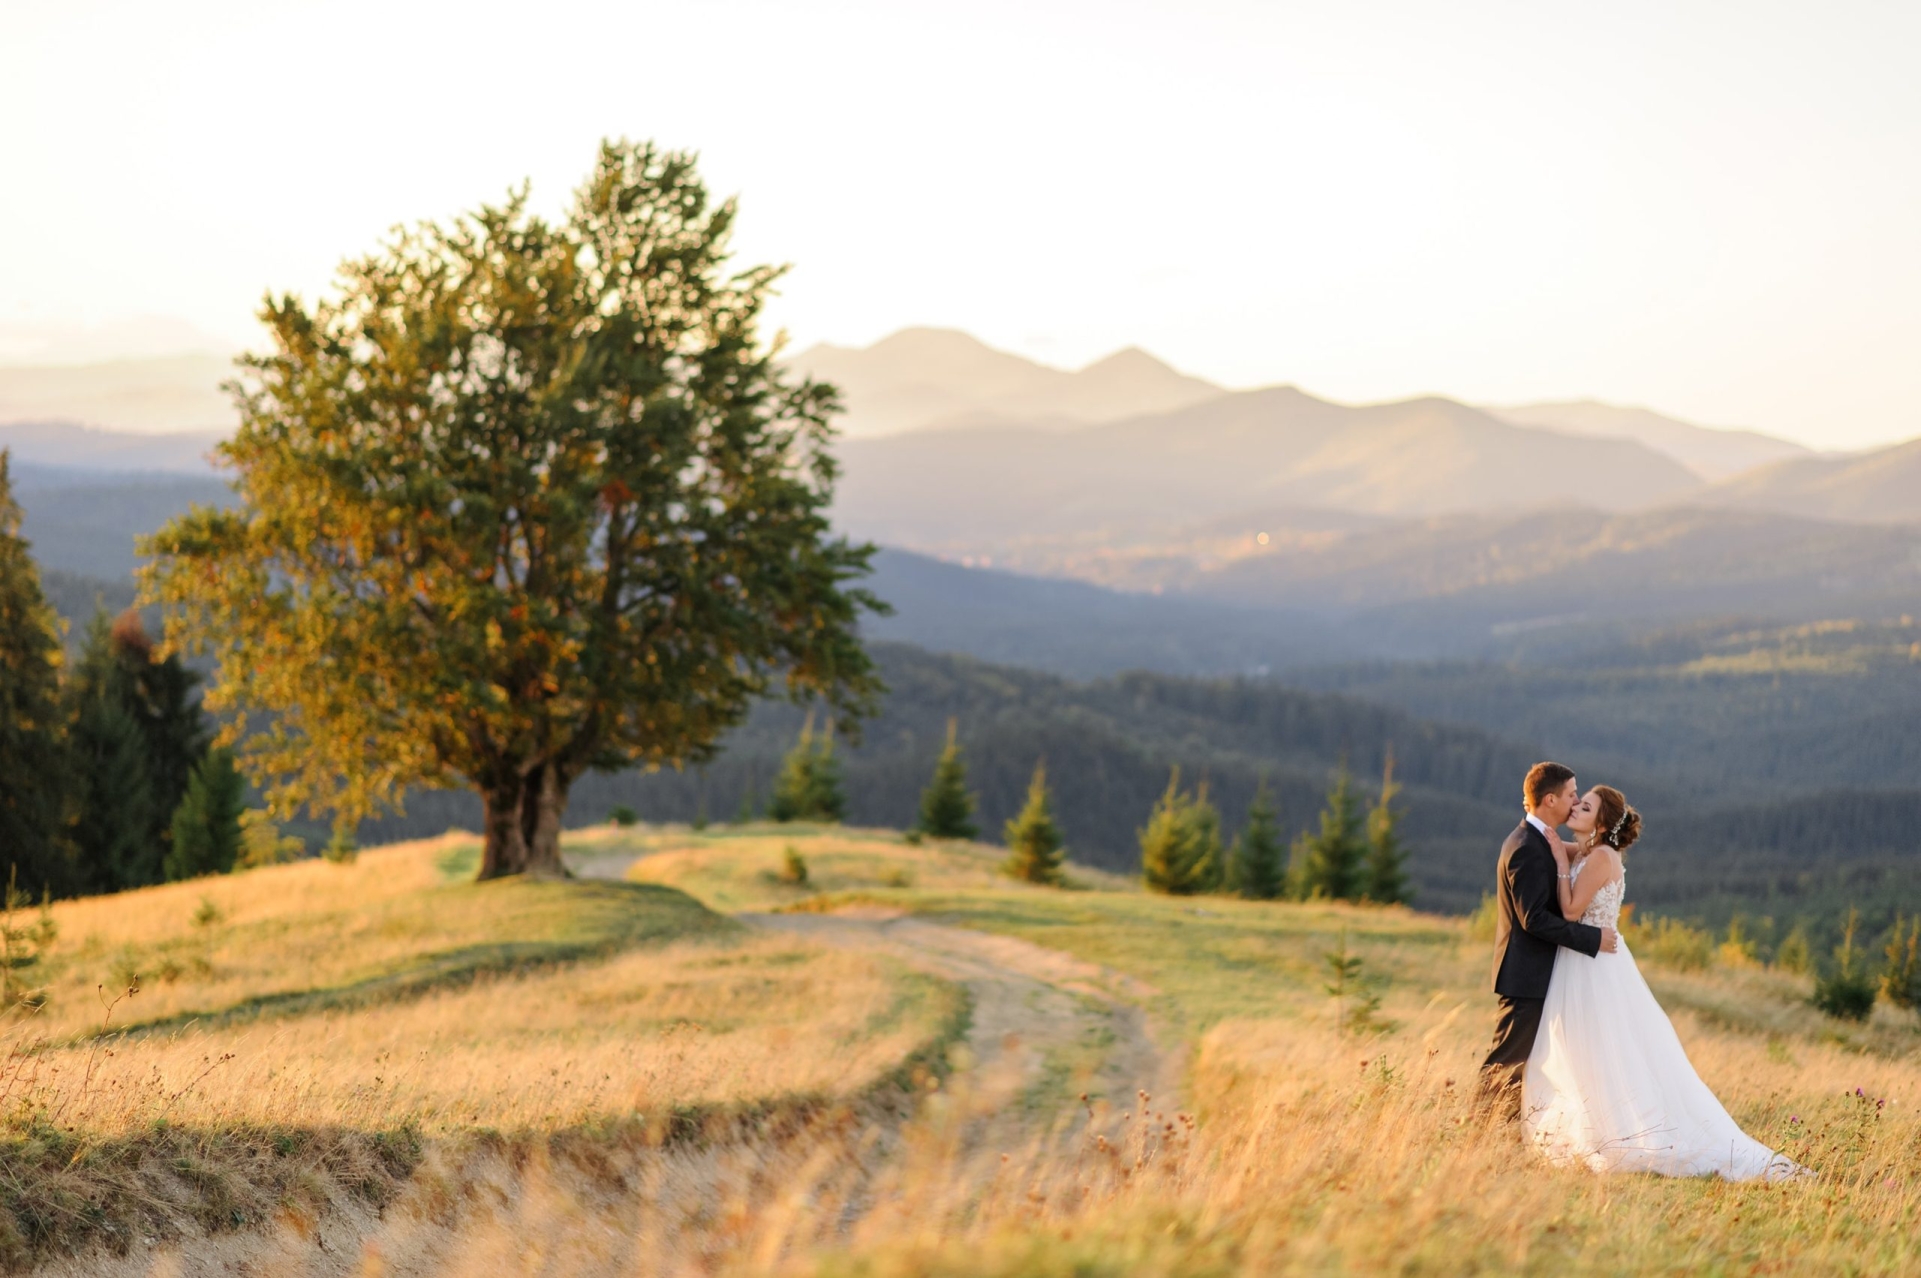 wedding photography in the mountains 2021 09 02 00 26 56 utc min scaled